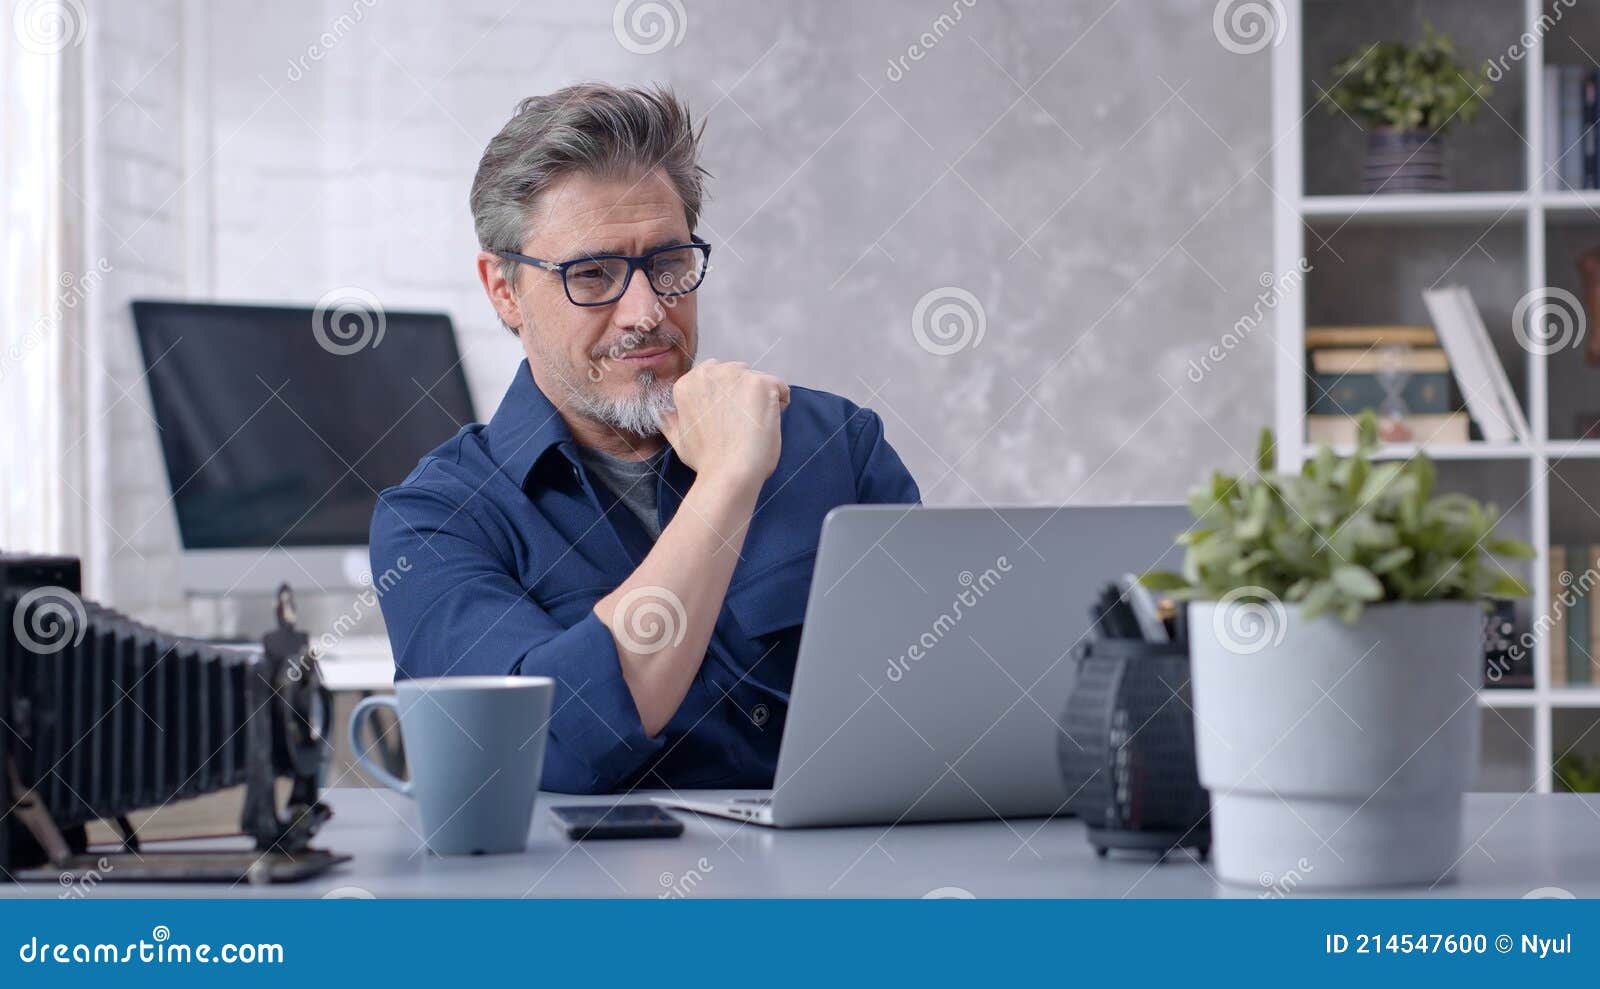 man working with laptop at home office